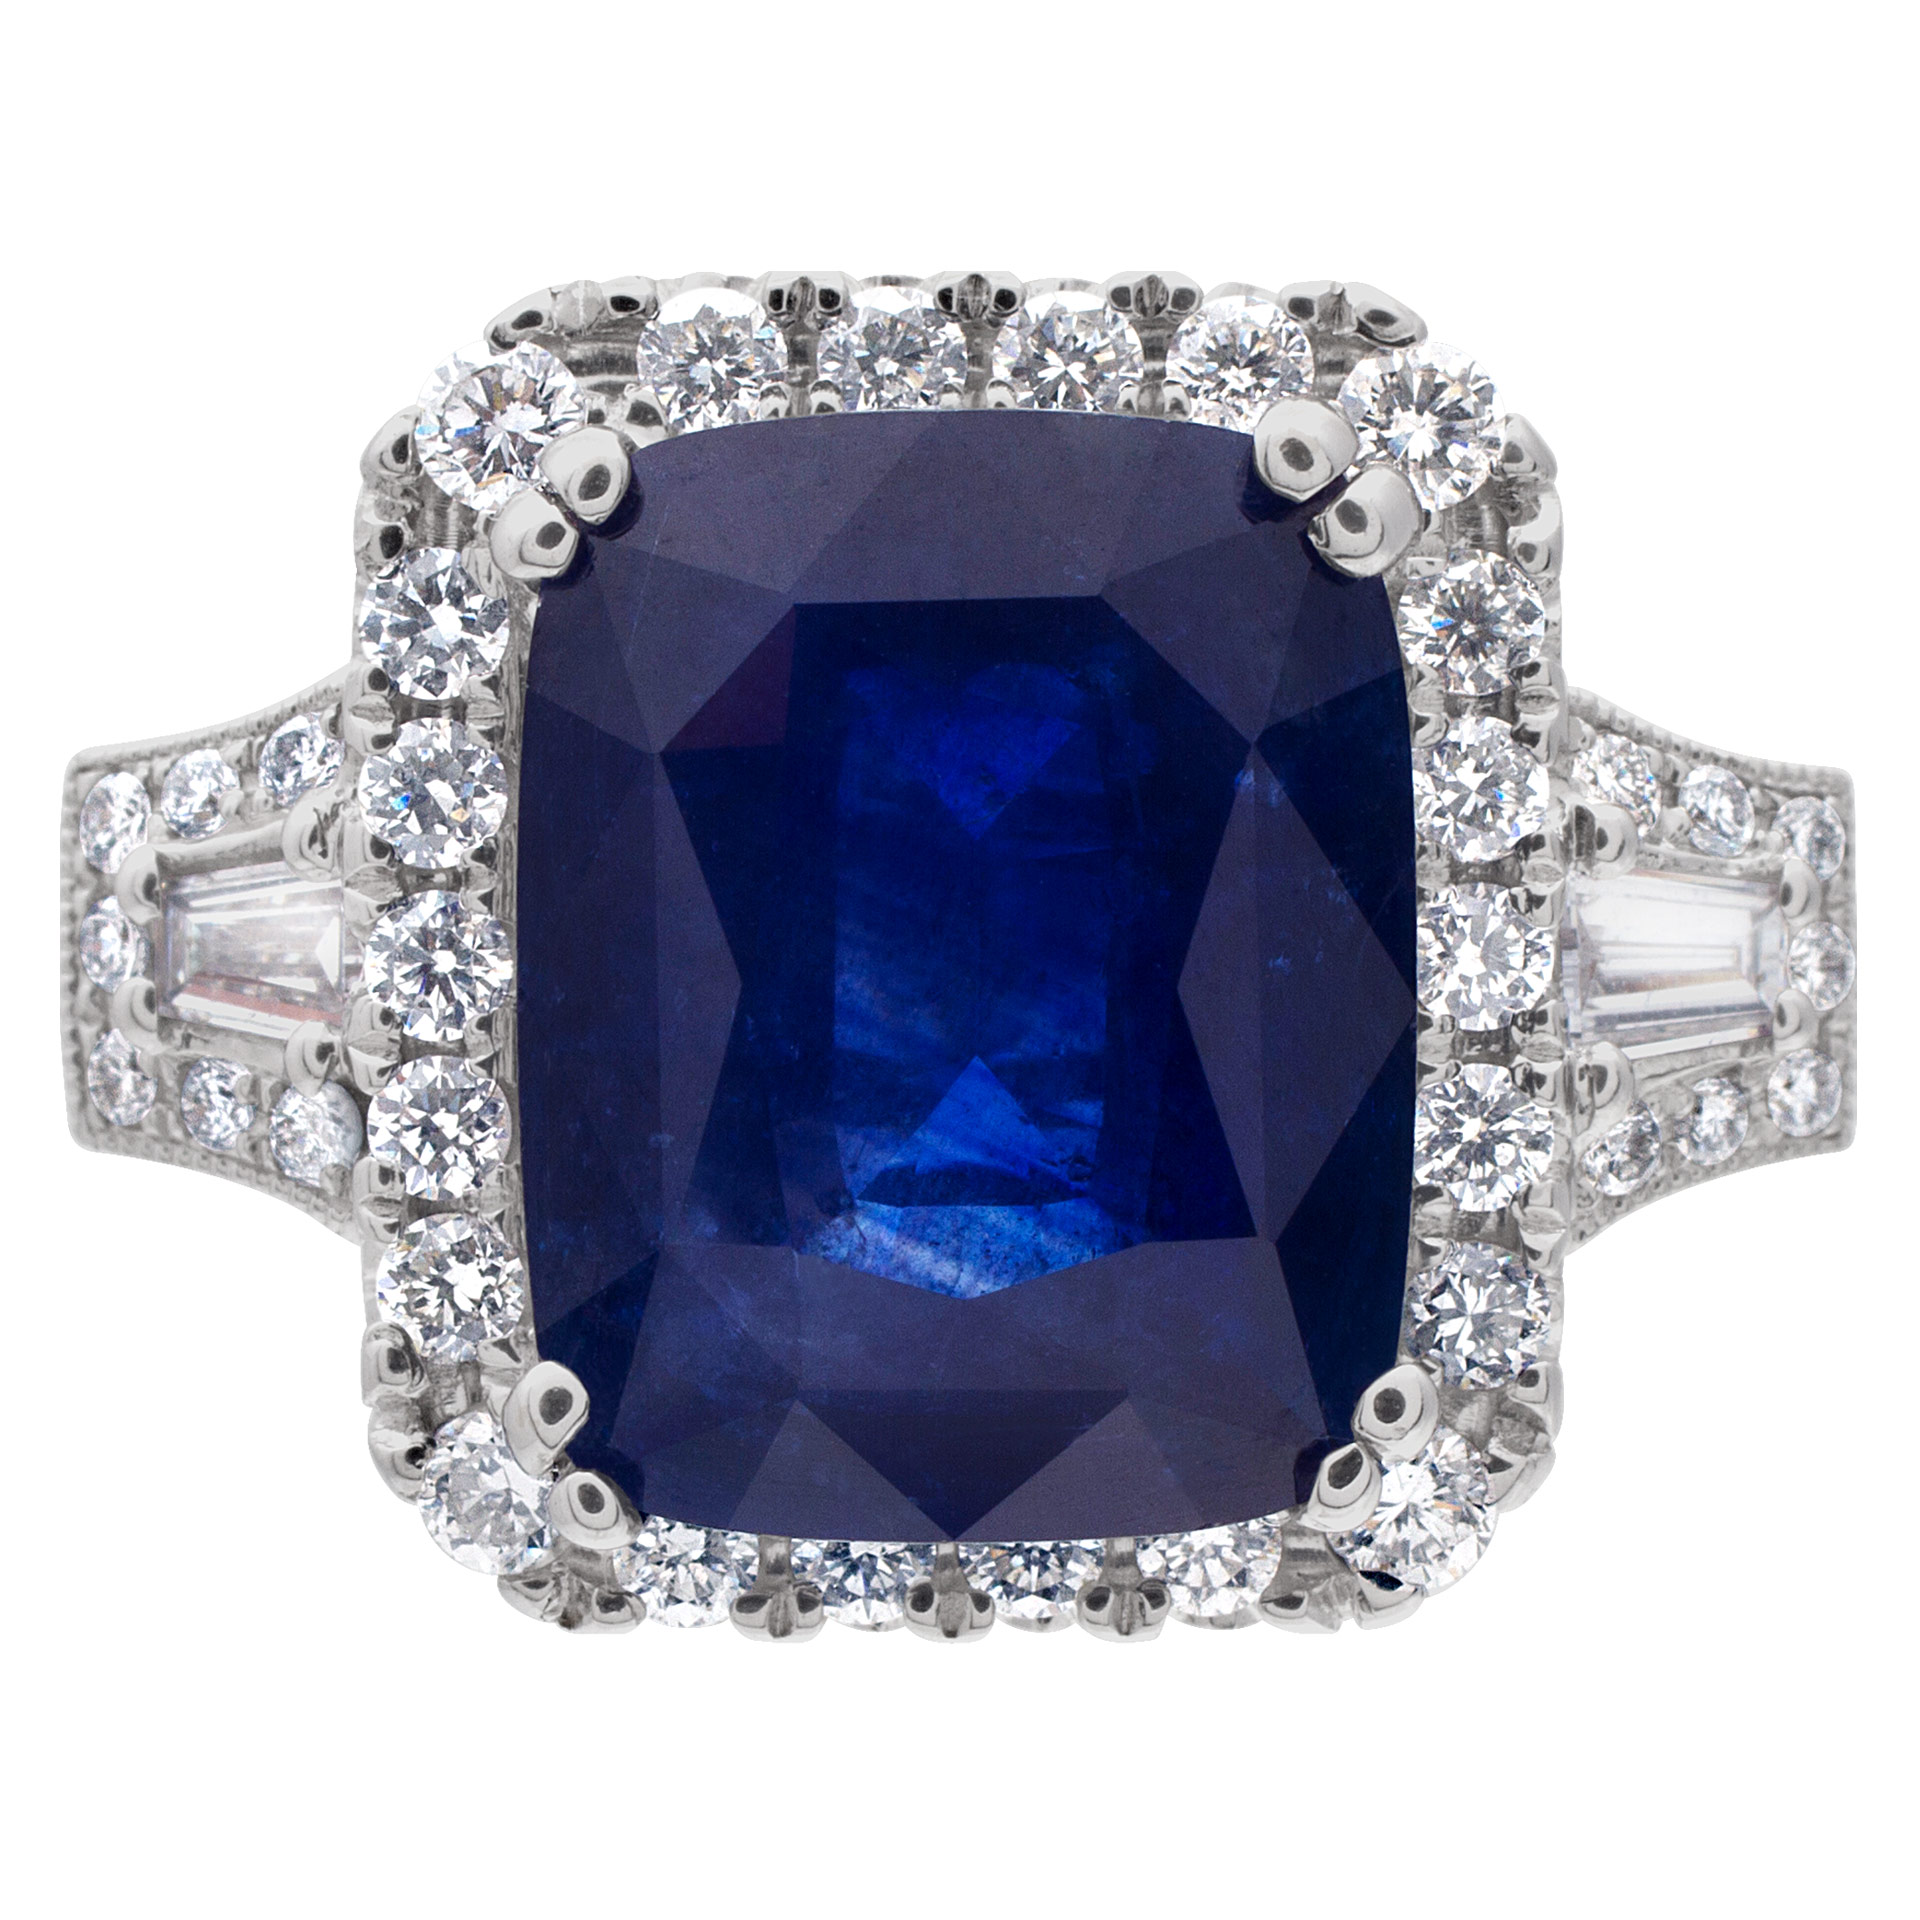 Beautiful 7.26 carats blue sapphire and diamond ring in 18k white gold image 1